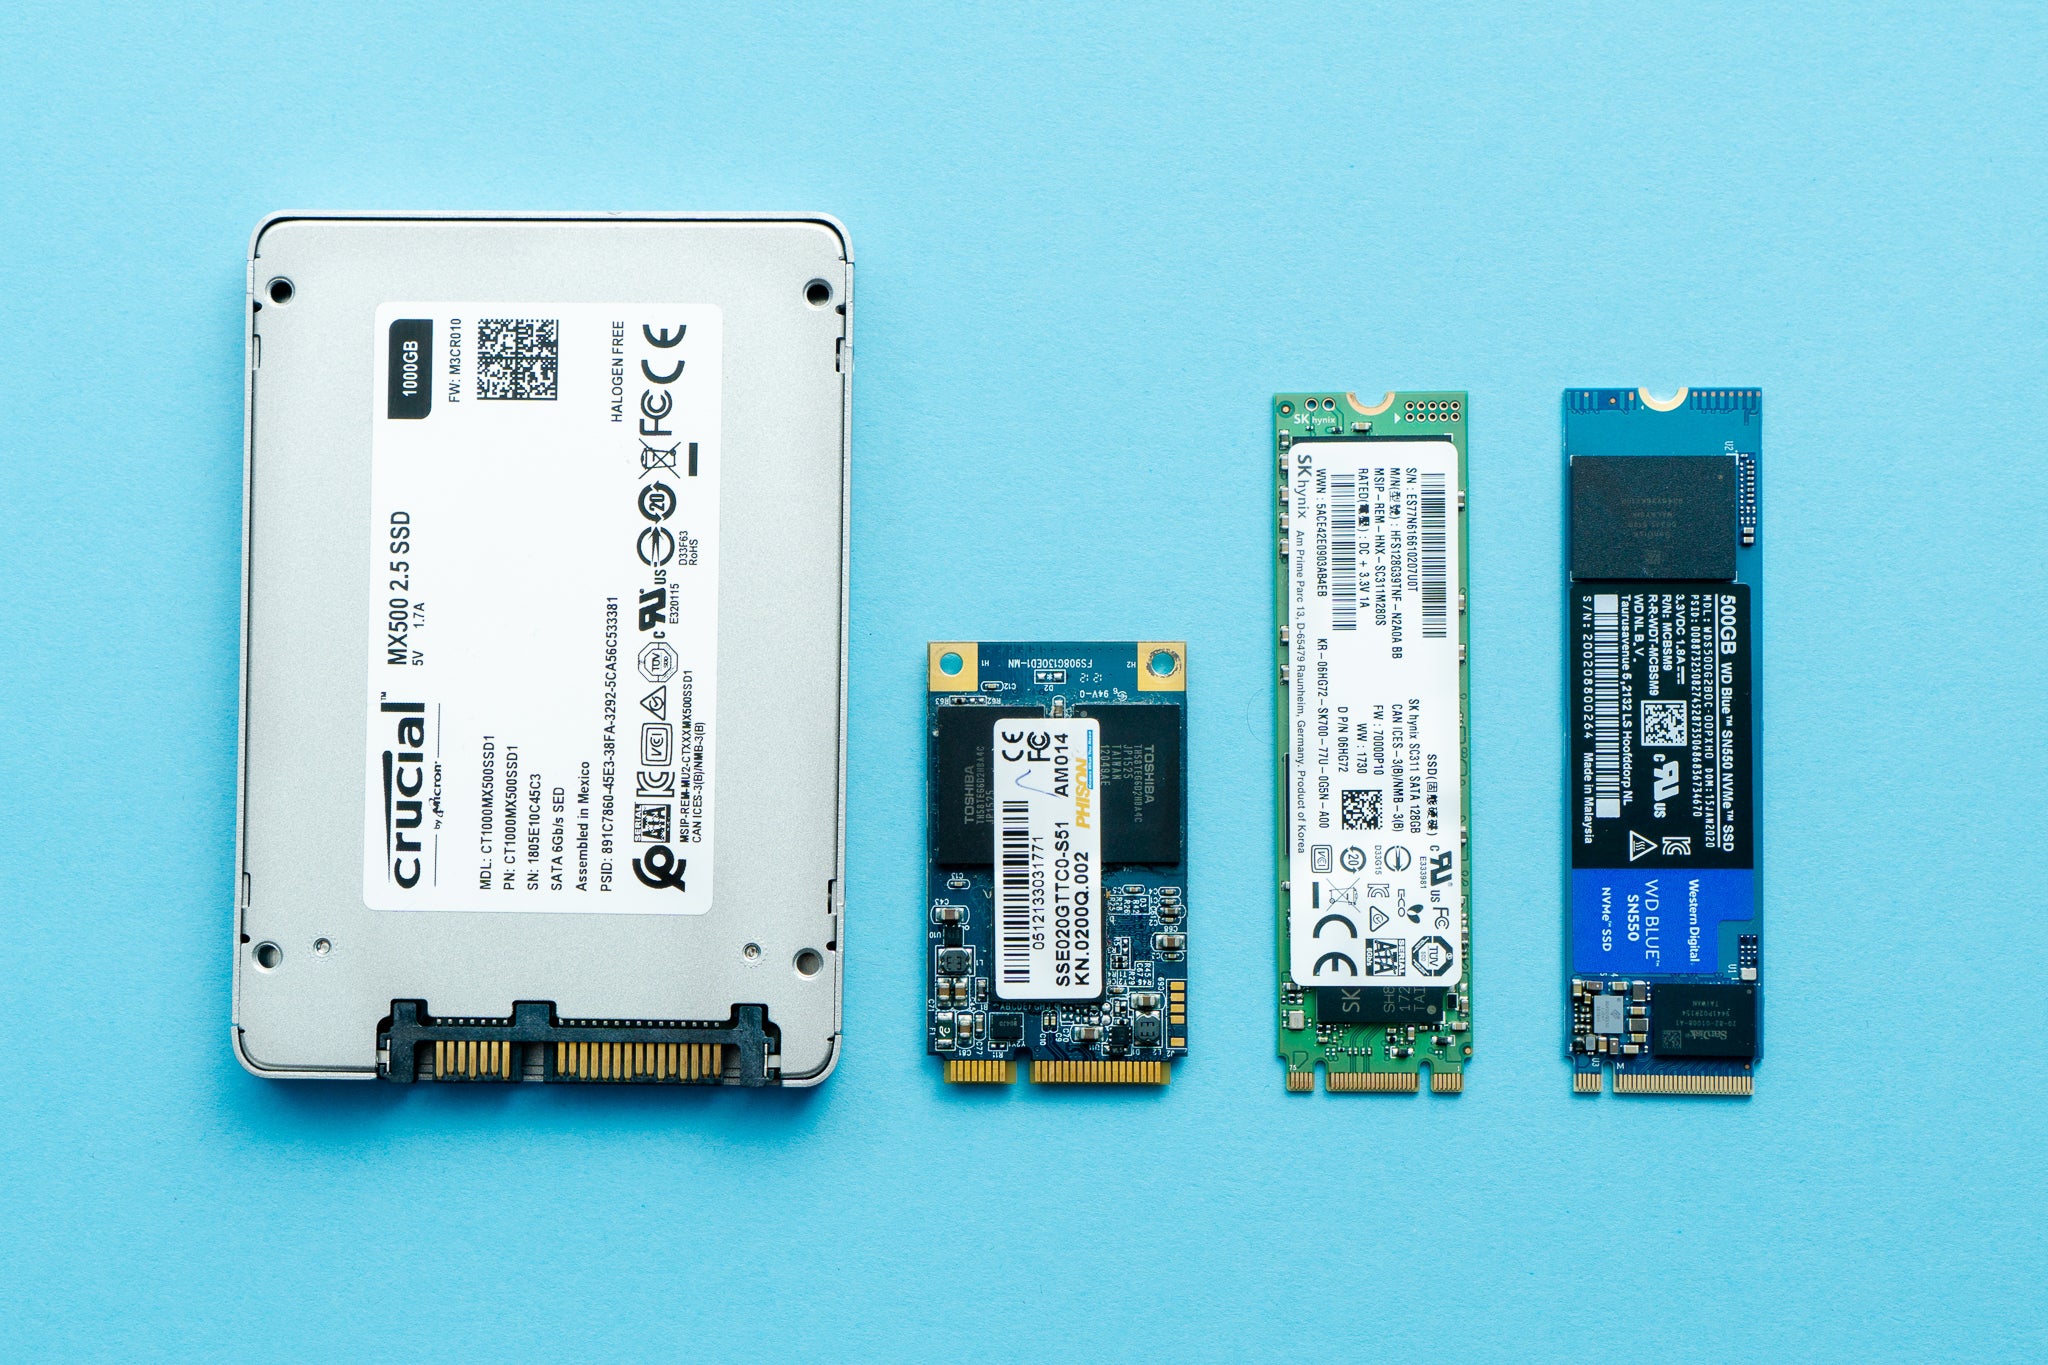 SSDs, with their solid-state design, offer increased reliability and longevity compared to HDDs